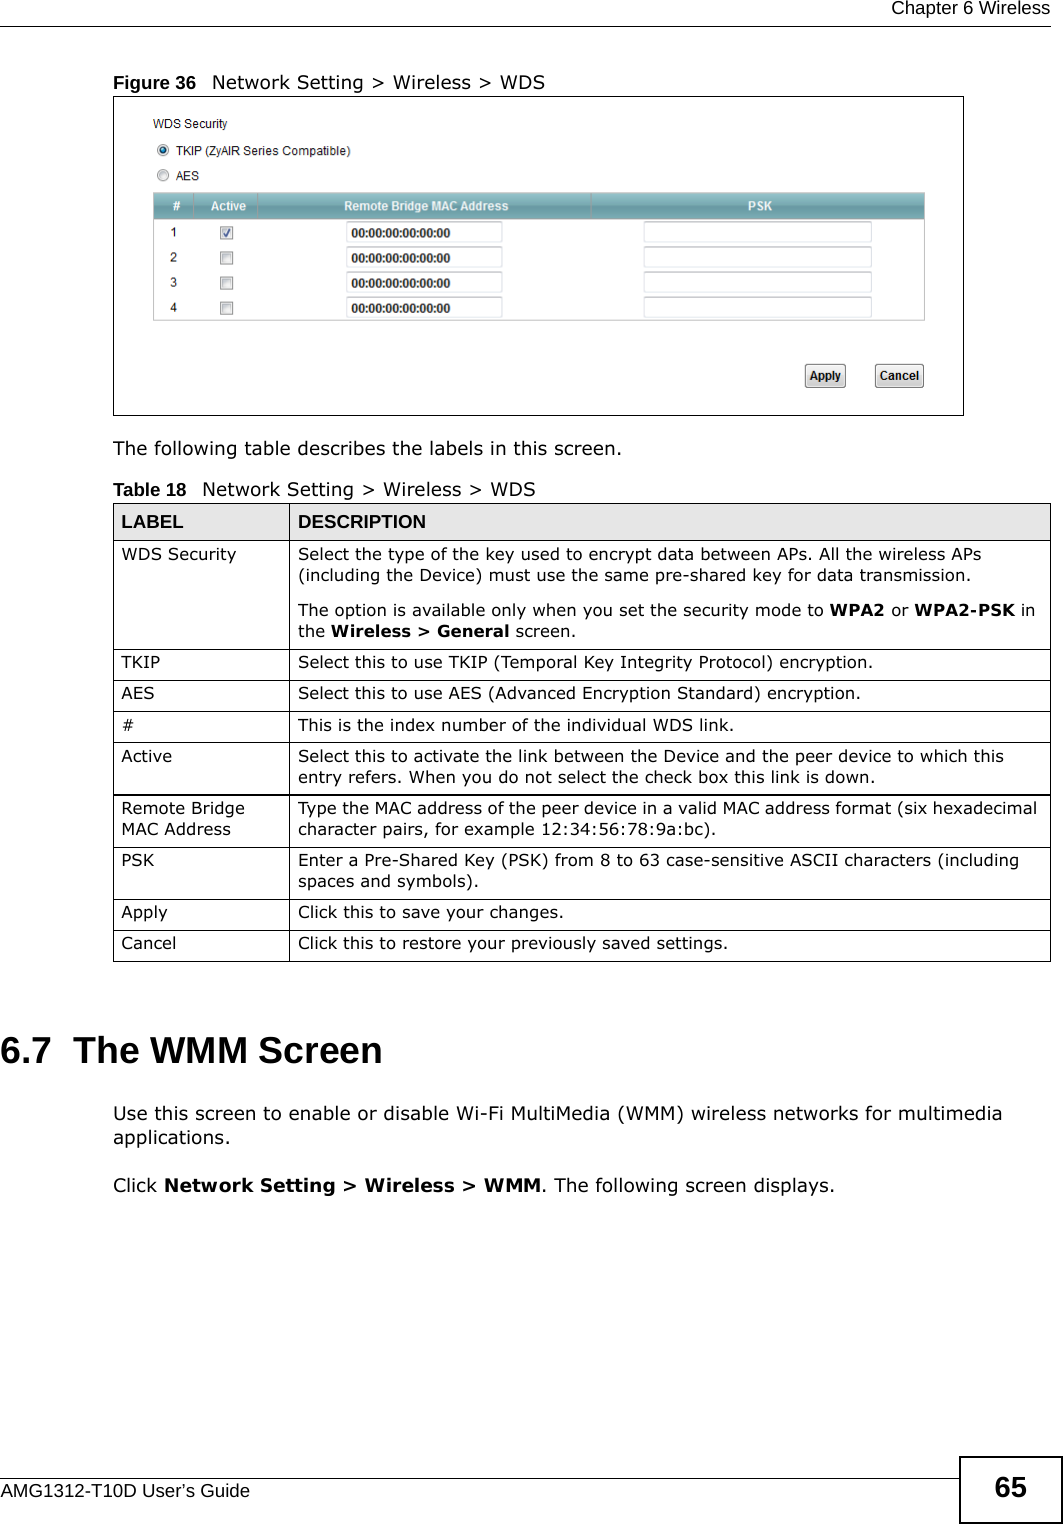  Chapter 6 WirelessAMG1312-T10D User’s Guide 65Figure 36   Network Setting &gt; Wireless &gt; WDSThe following table describes the labels in this screen.6.7  The WMM ScreenUse this screen to enable or disable Wi-Fi MultiMedia (WMM) wireless networks for multimedia applications.Click Network Setting &gt; Wireless &gt; WMM. The following screen displays.Table 18   Network Setting &gt; Wireless &gt; WDSLABEL DESCRIPTIONWDS Security Select the type of the key used to encrypt data between APs. All the wireless APs (including the Device) must use the same pre-shared key for data transmission.The option is available only when you set the security mode to WPA2 or WPA2-PSK in the Wireless &gt; General screen.TKIP Select this to use TKIP (Temporal Key Integrity Protocol) encryption.AES Select this to use AES (Advanced Encryption Standard) encryption. # This is the index number of the individual WDS link.Active Select this to activate the link between the Device and the peer device to which this entry refers. When you do not select the check box this link is down.Remote Bridge MAC AddressType the MAC address of the peer device in a valid MAC address format (six hexadecimal character pairs, for example 12:34:56:78:9a:bc).PSK Enter a Pre-Shared Key (PSK) from 8 to 63 case-sensitive ASCII characters (including spaces and symbols).Apply Click this to save your changes.Cancel Click this to restore your previously saved settings.